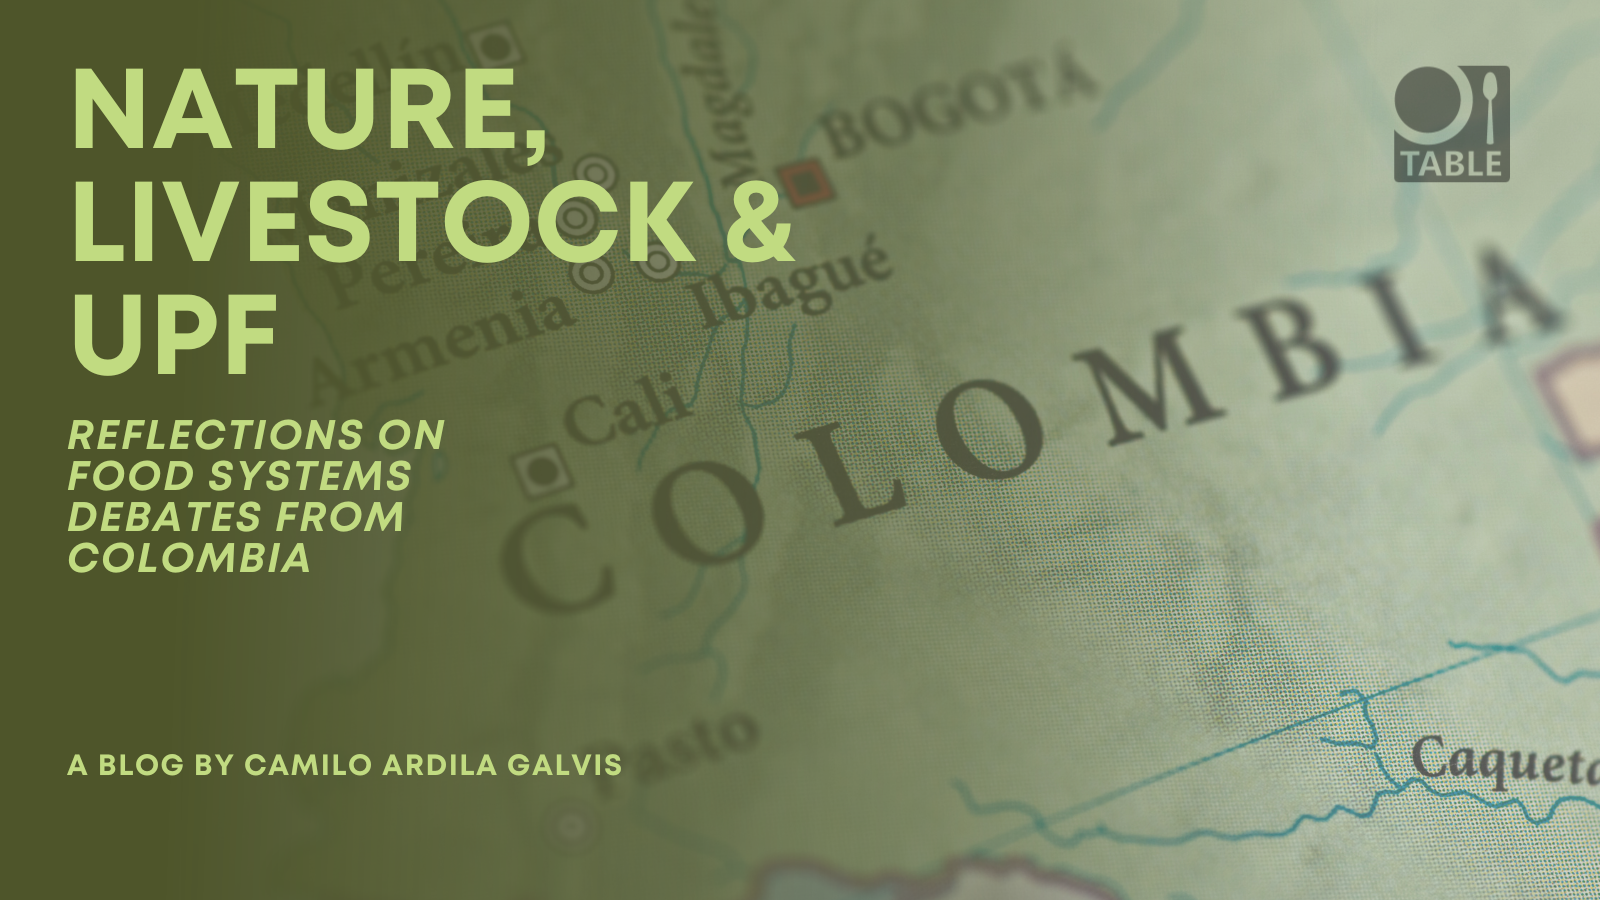 A flyer for the new TABLE blog "Nature, livestock & UPF: Reflections on food systems debates from Colombia" by Camilo Ardila Galvis. 